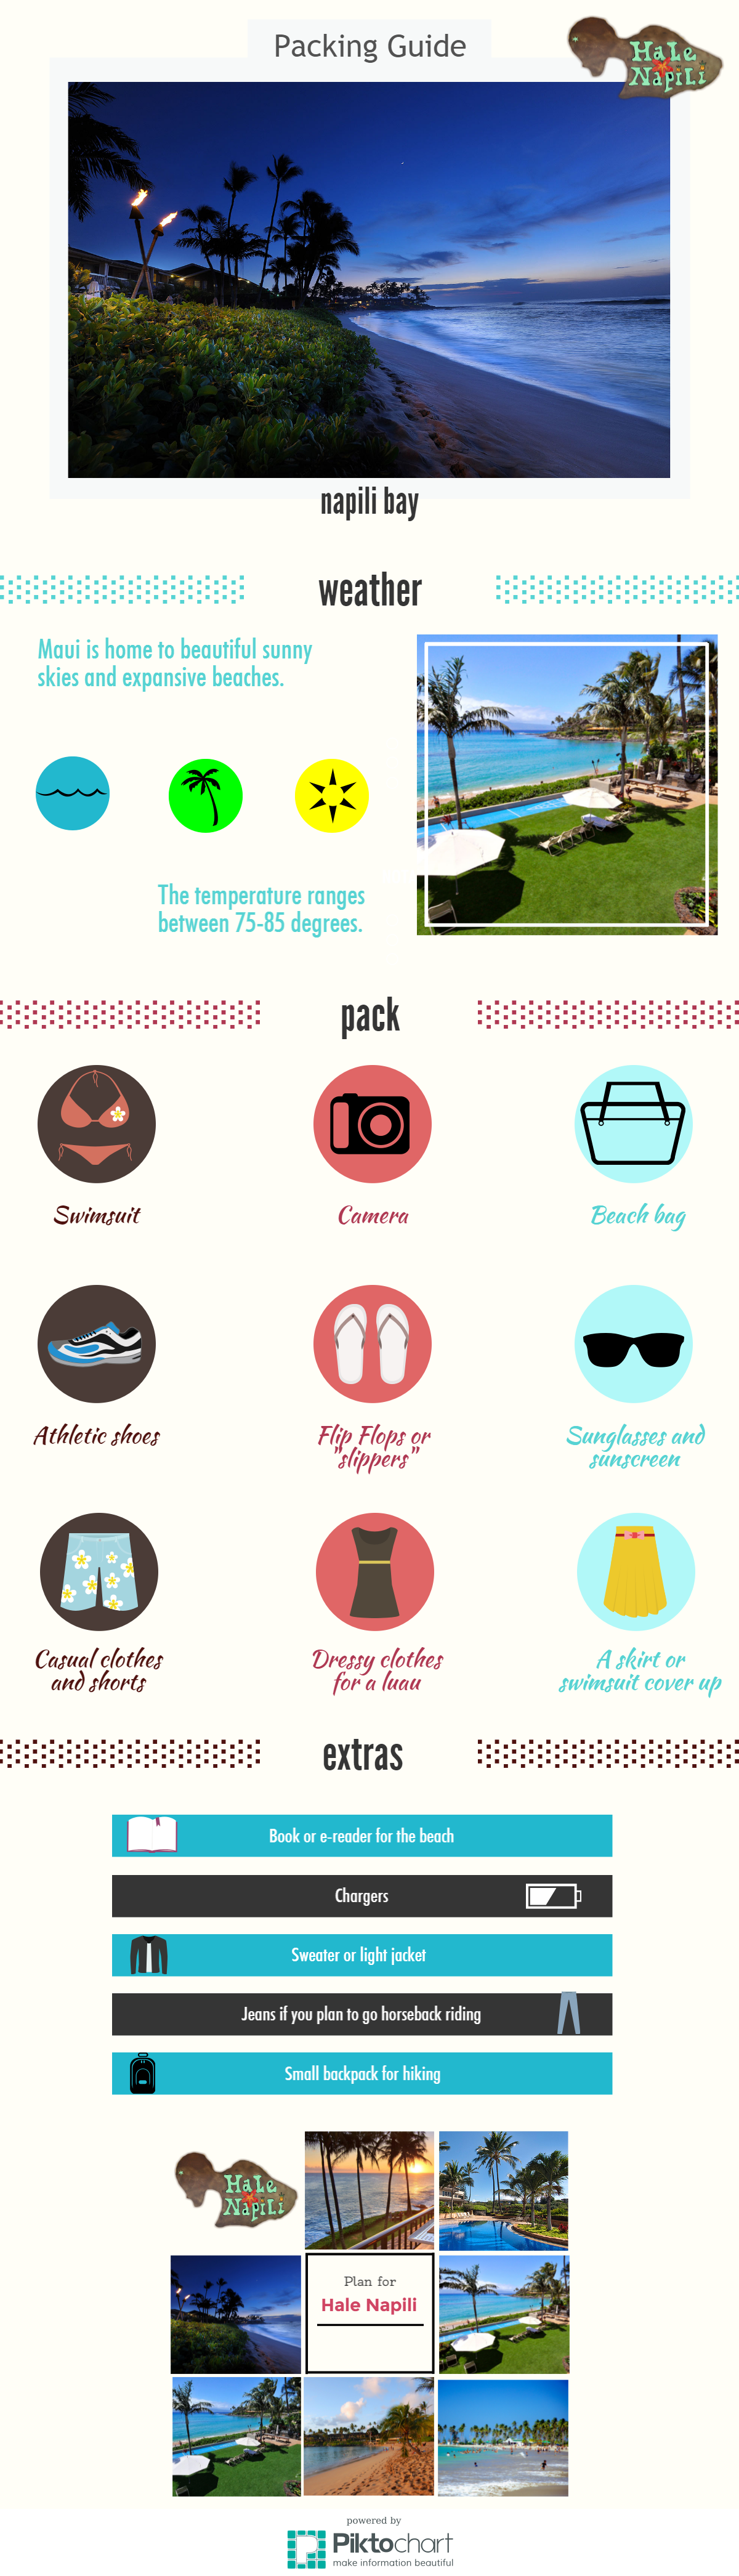 Maui packing guide infographic